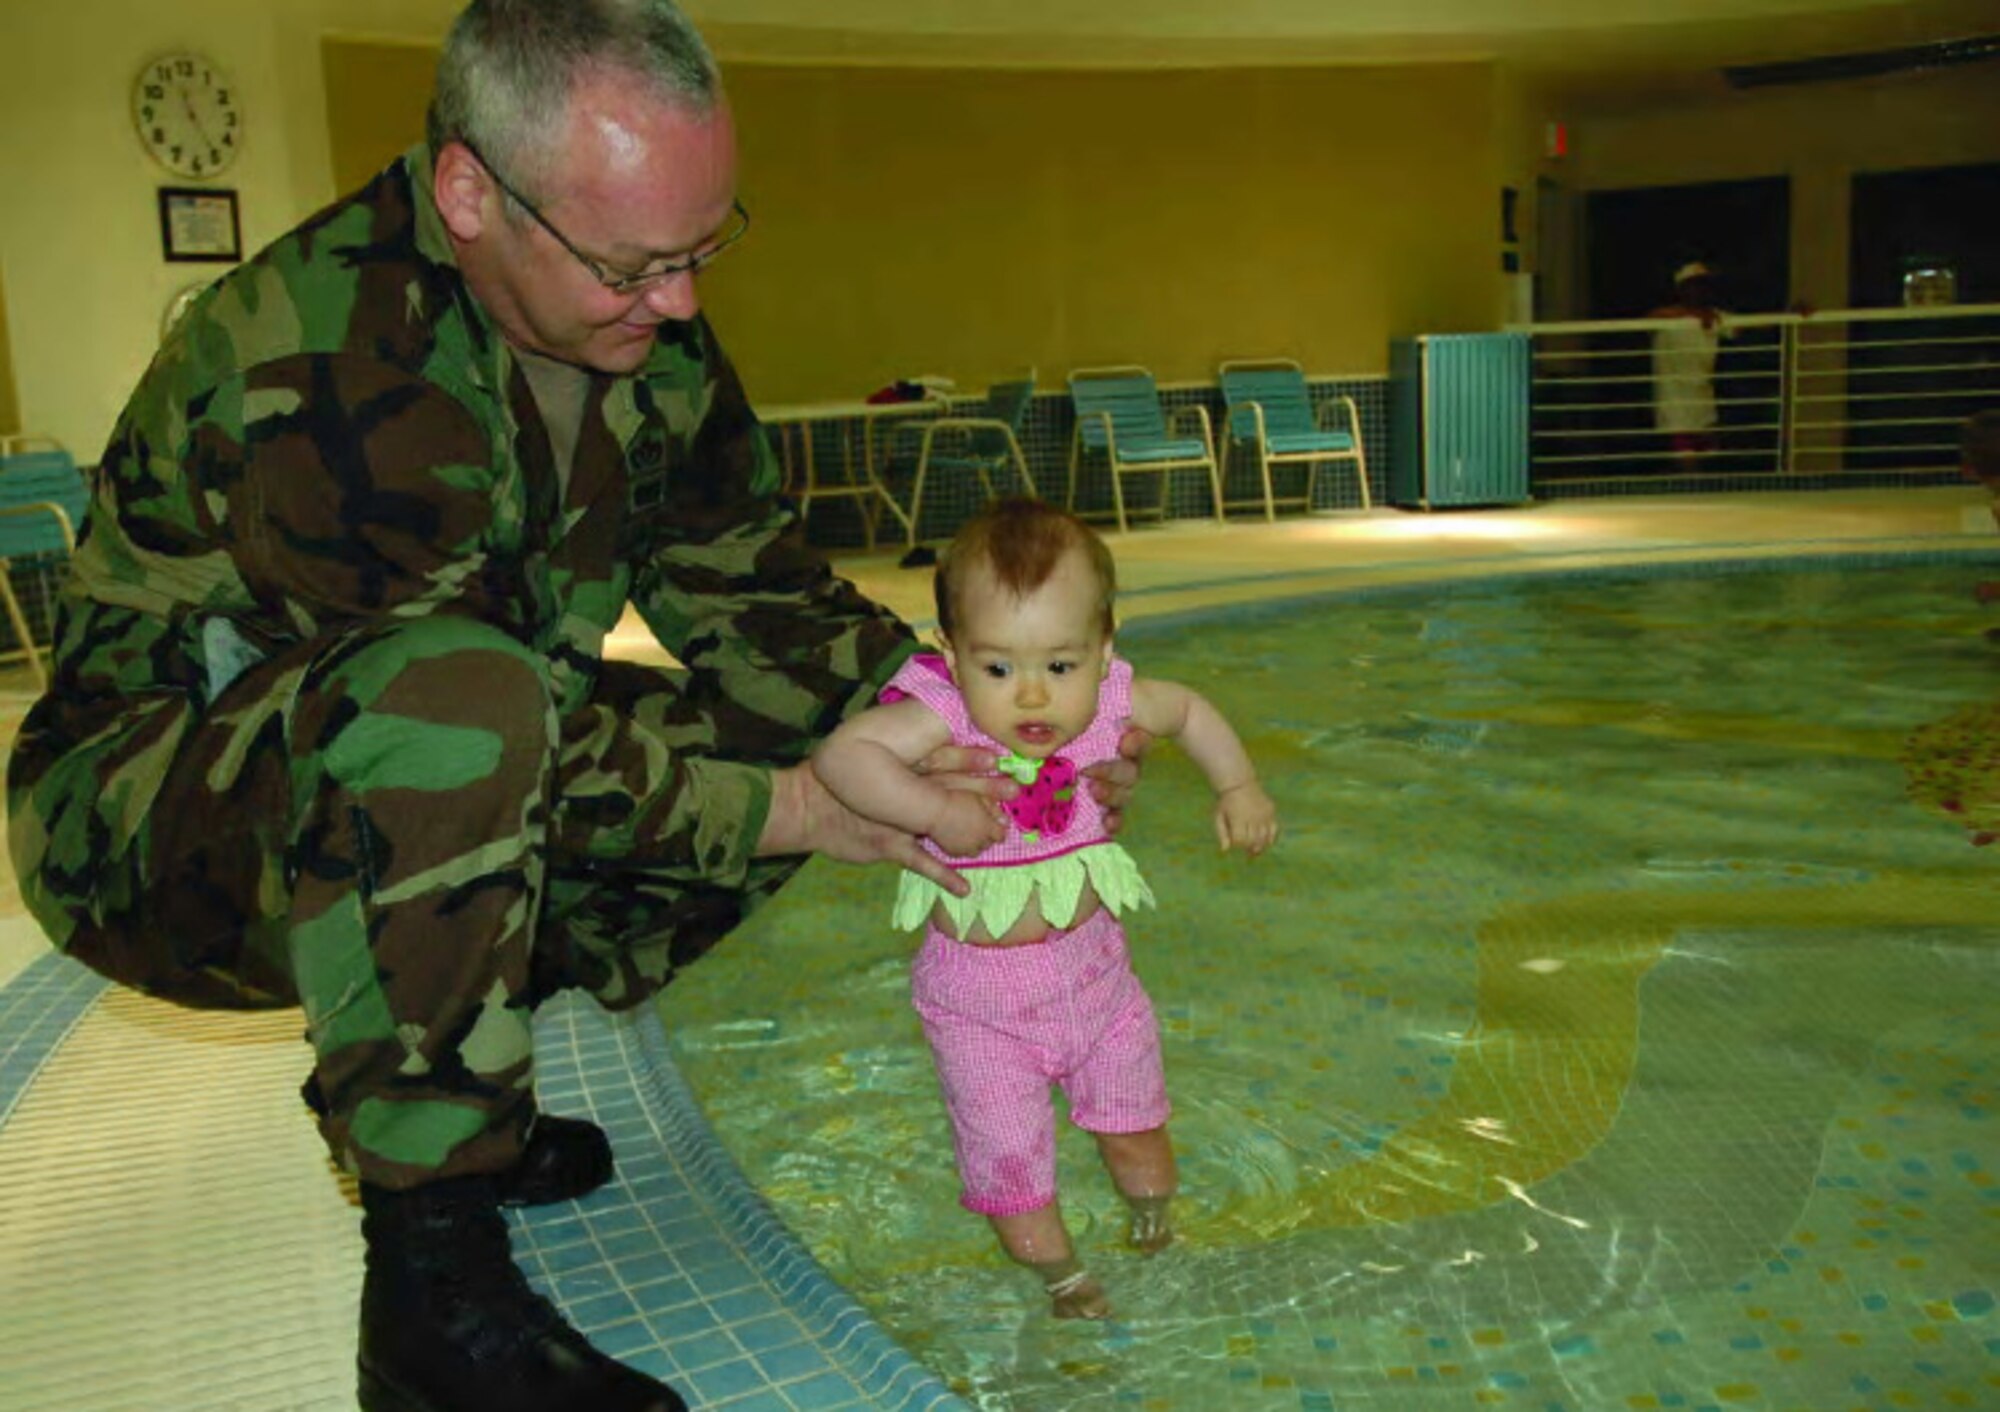 OSAN AIR BASE, Republic of Korea --  Col. Shane Stegman, 51st Mission Support Group deputy commander, and daughter Ellie, 9 months, were the first people to take a dip in Osan's new indoor wading pool May 22. (U.S. Air Force photo by Staff Sgt. Andrea Knudson)